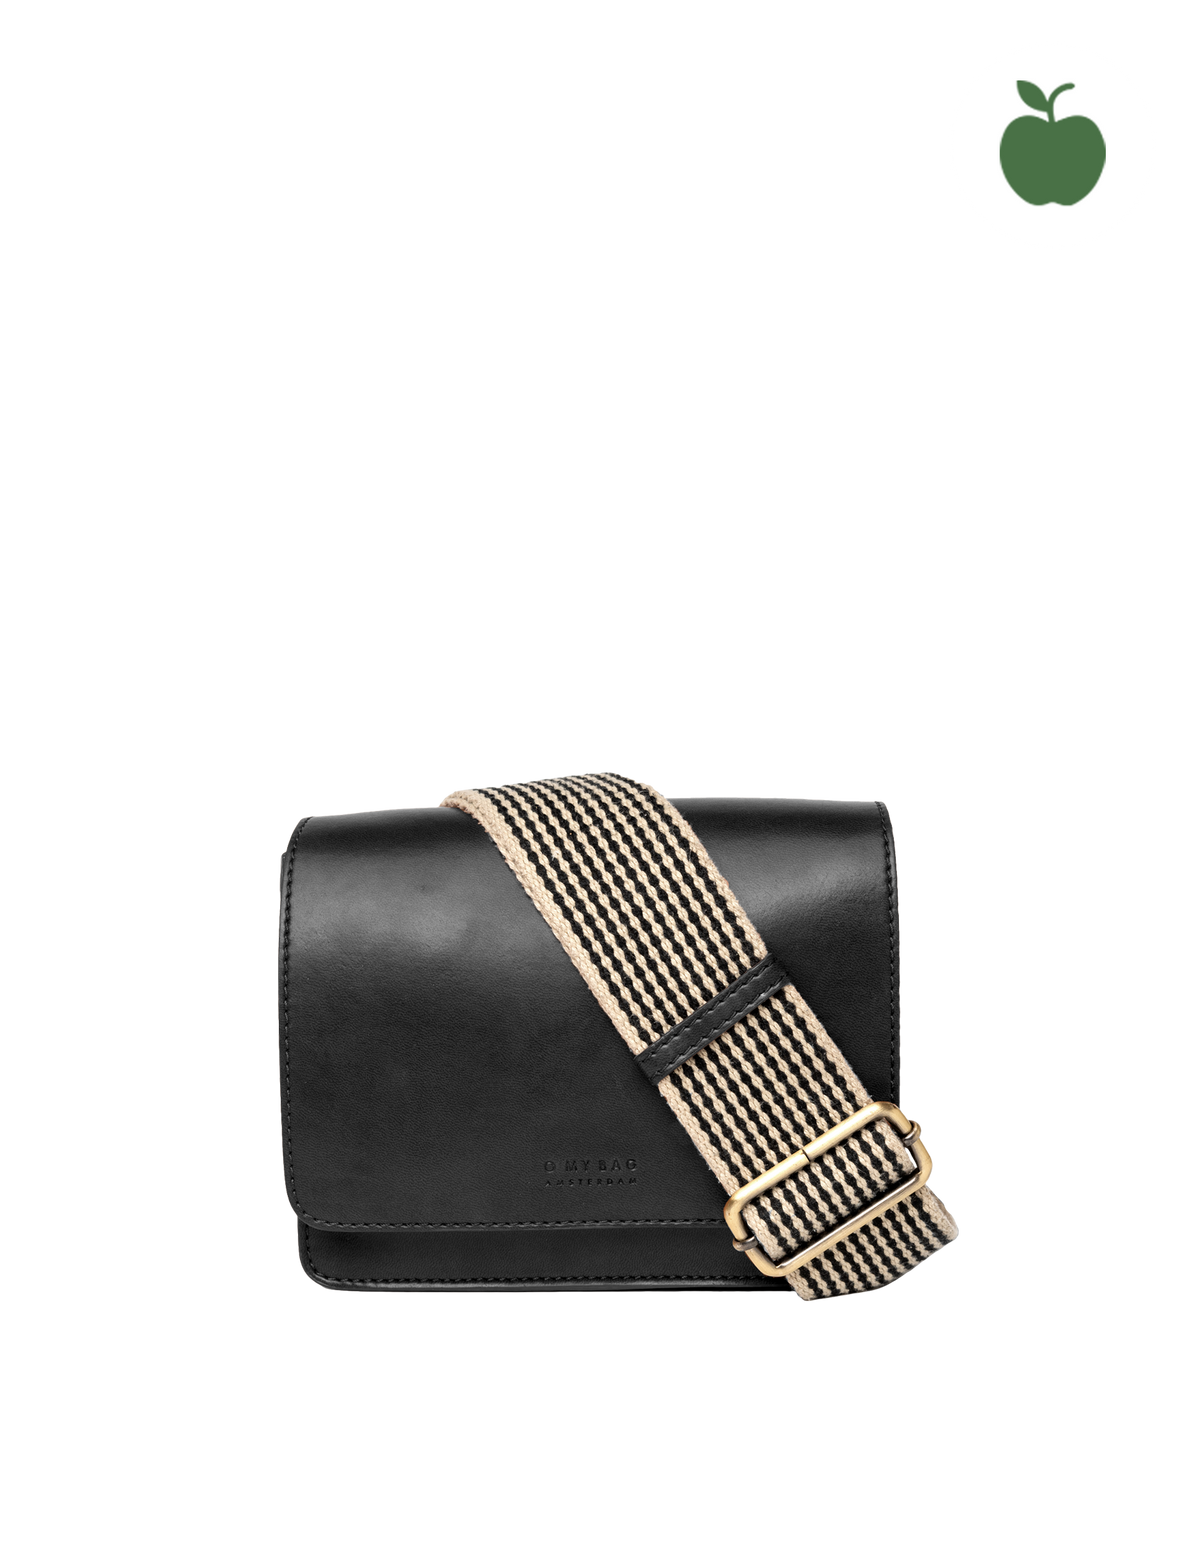 Black Apple Leather Cross Body Bag- Audrey Mini with Checkered Strap